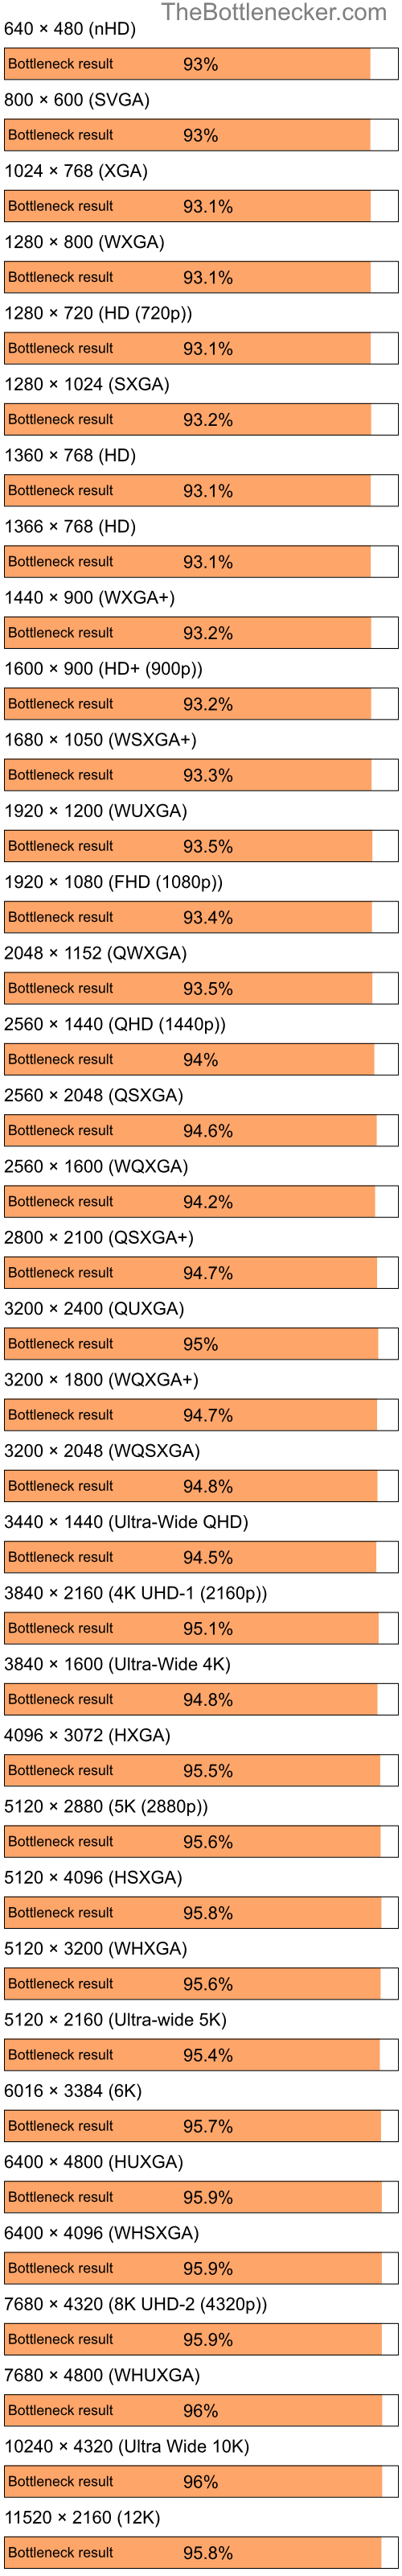 Bottleneck results by resolution for Intel Atom Z520 and AMD Radeon 9200 SE in Graphic Card Intense Tasks